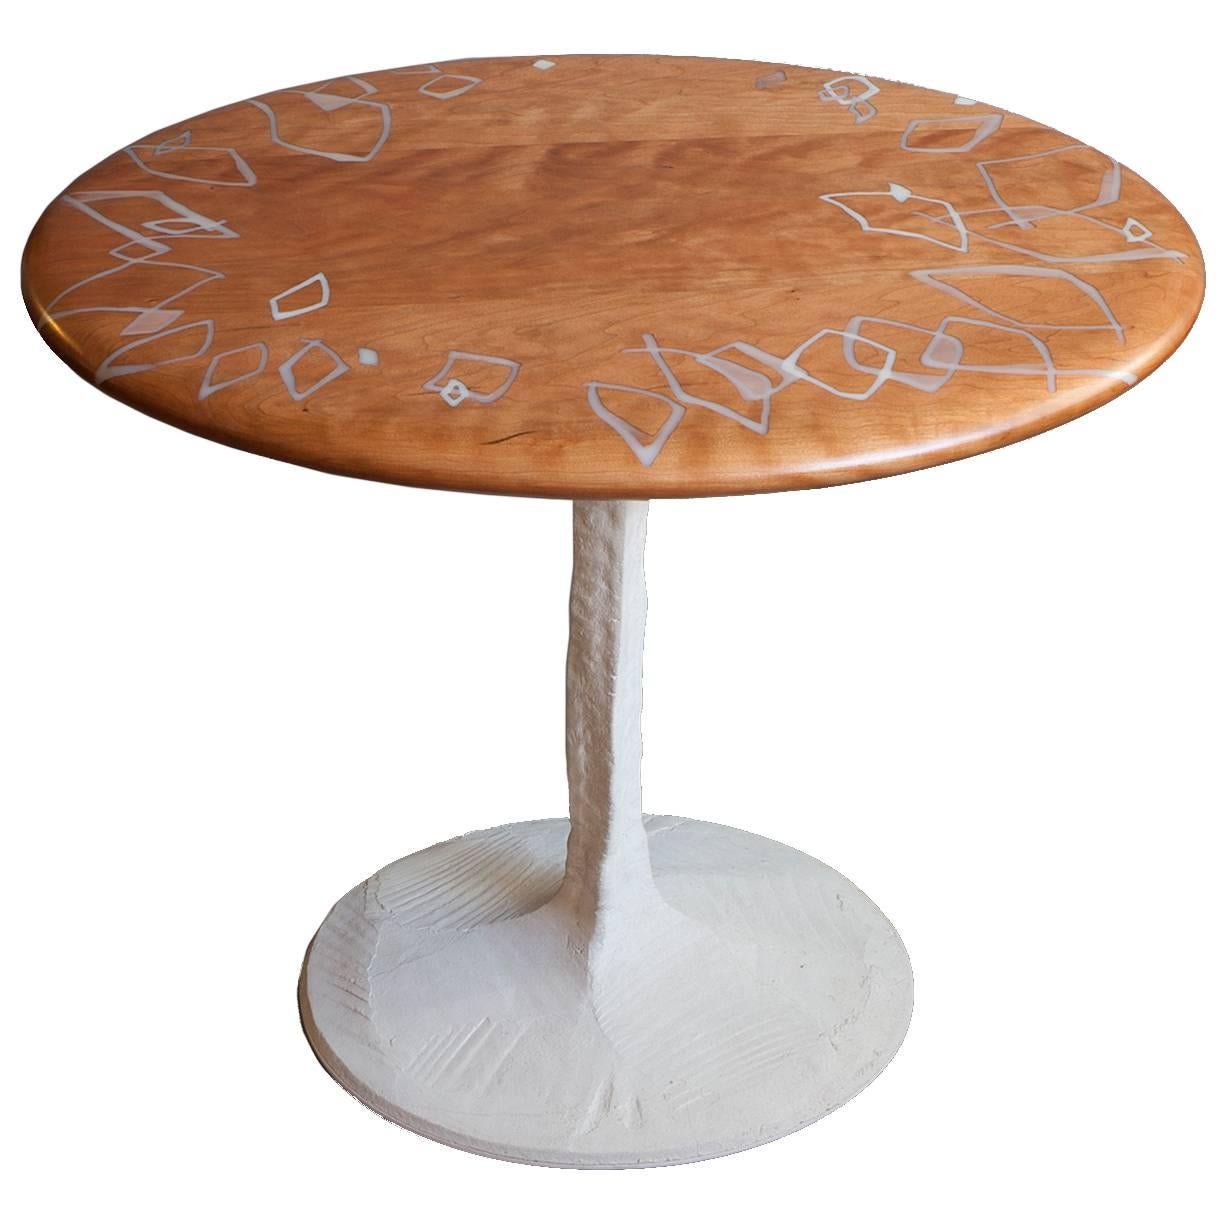 Sky with Diamonds Side Table in Cherry with Concrete Pedestal Base - IN STOCK For Sale